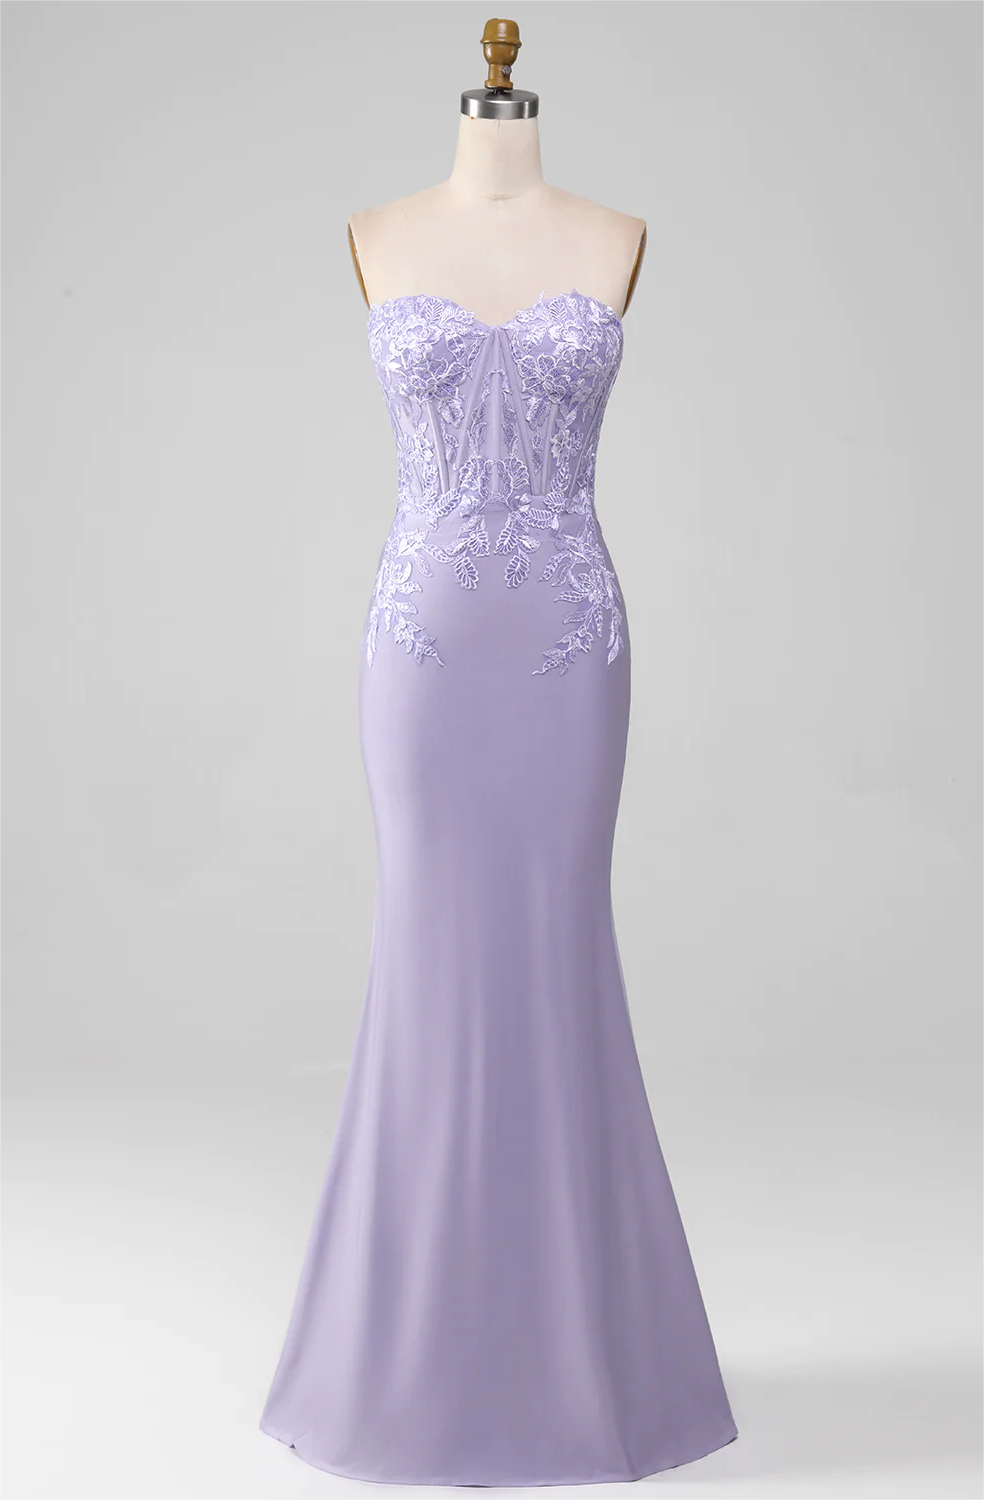 Prom Dress,lilac Sheath Strapless Corset Prom Dresses With Lace Appliques